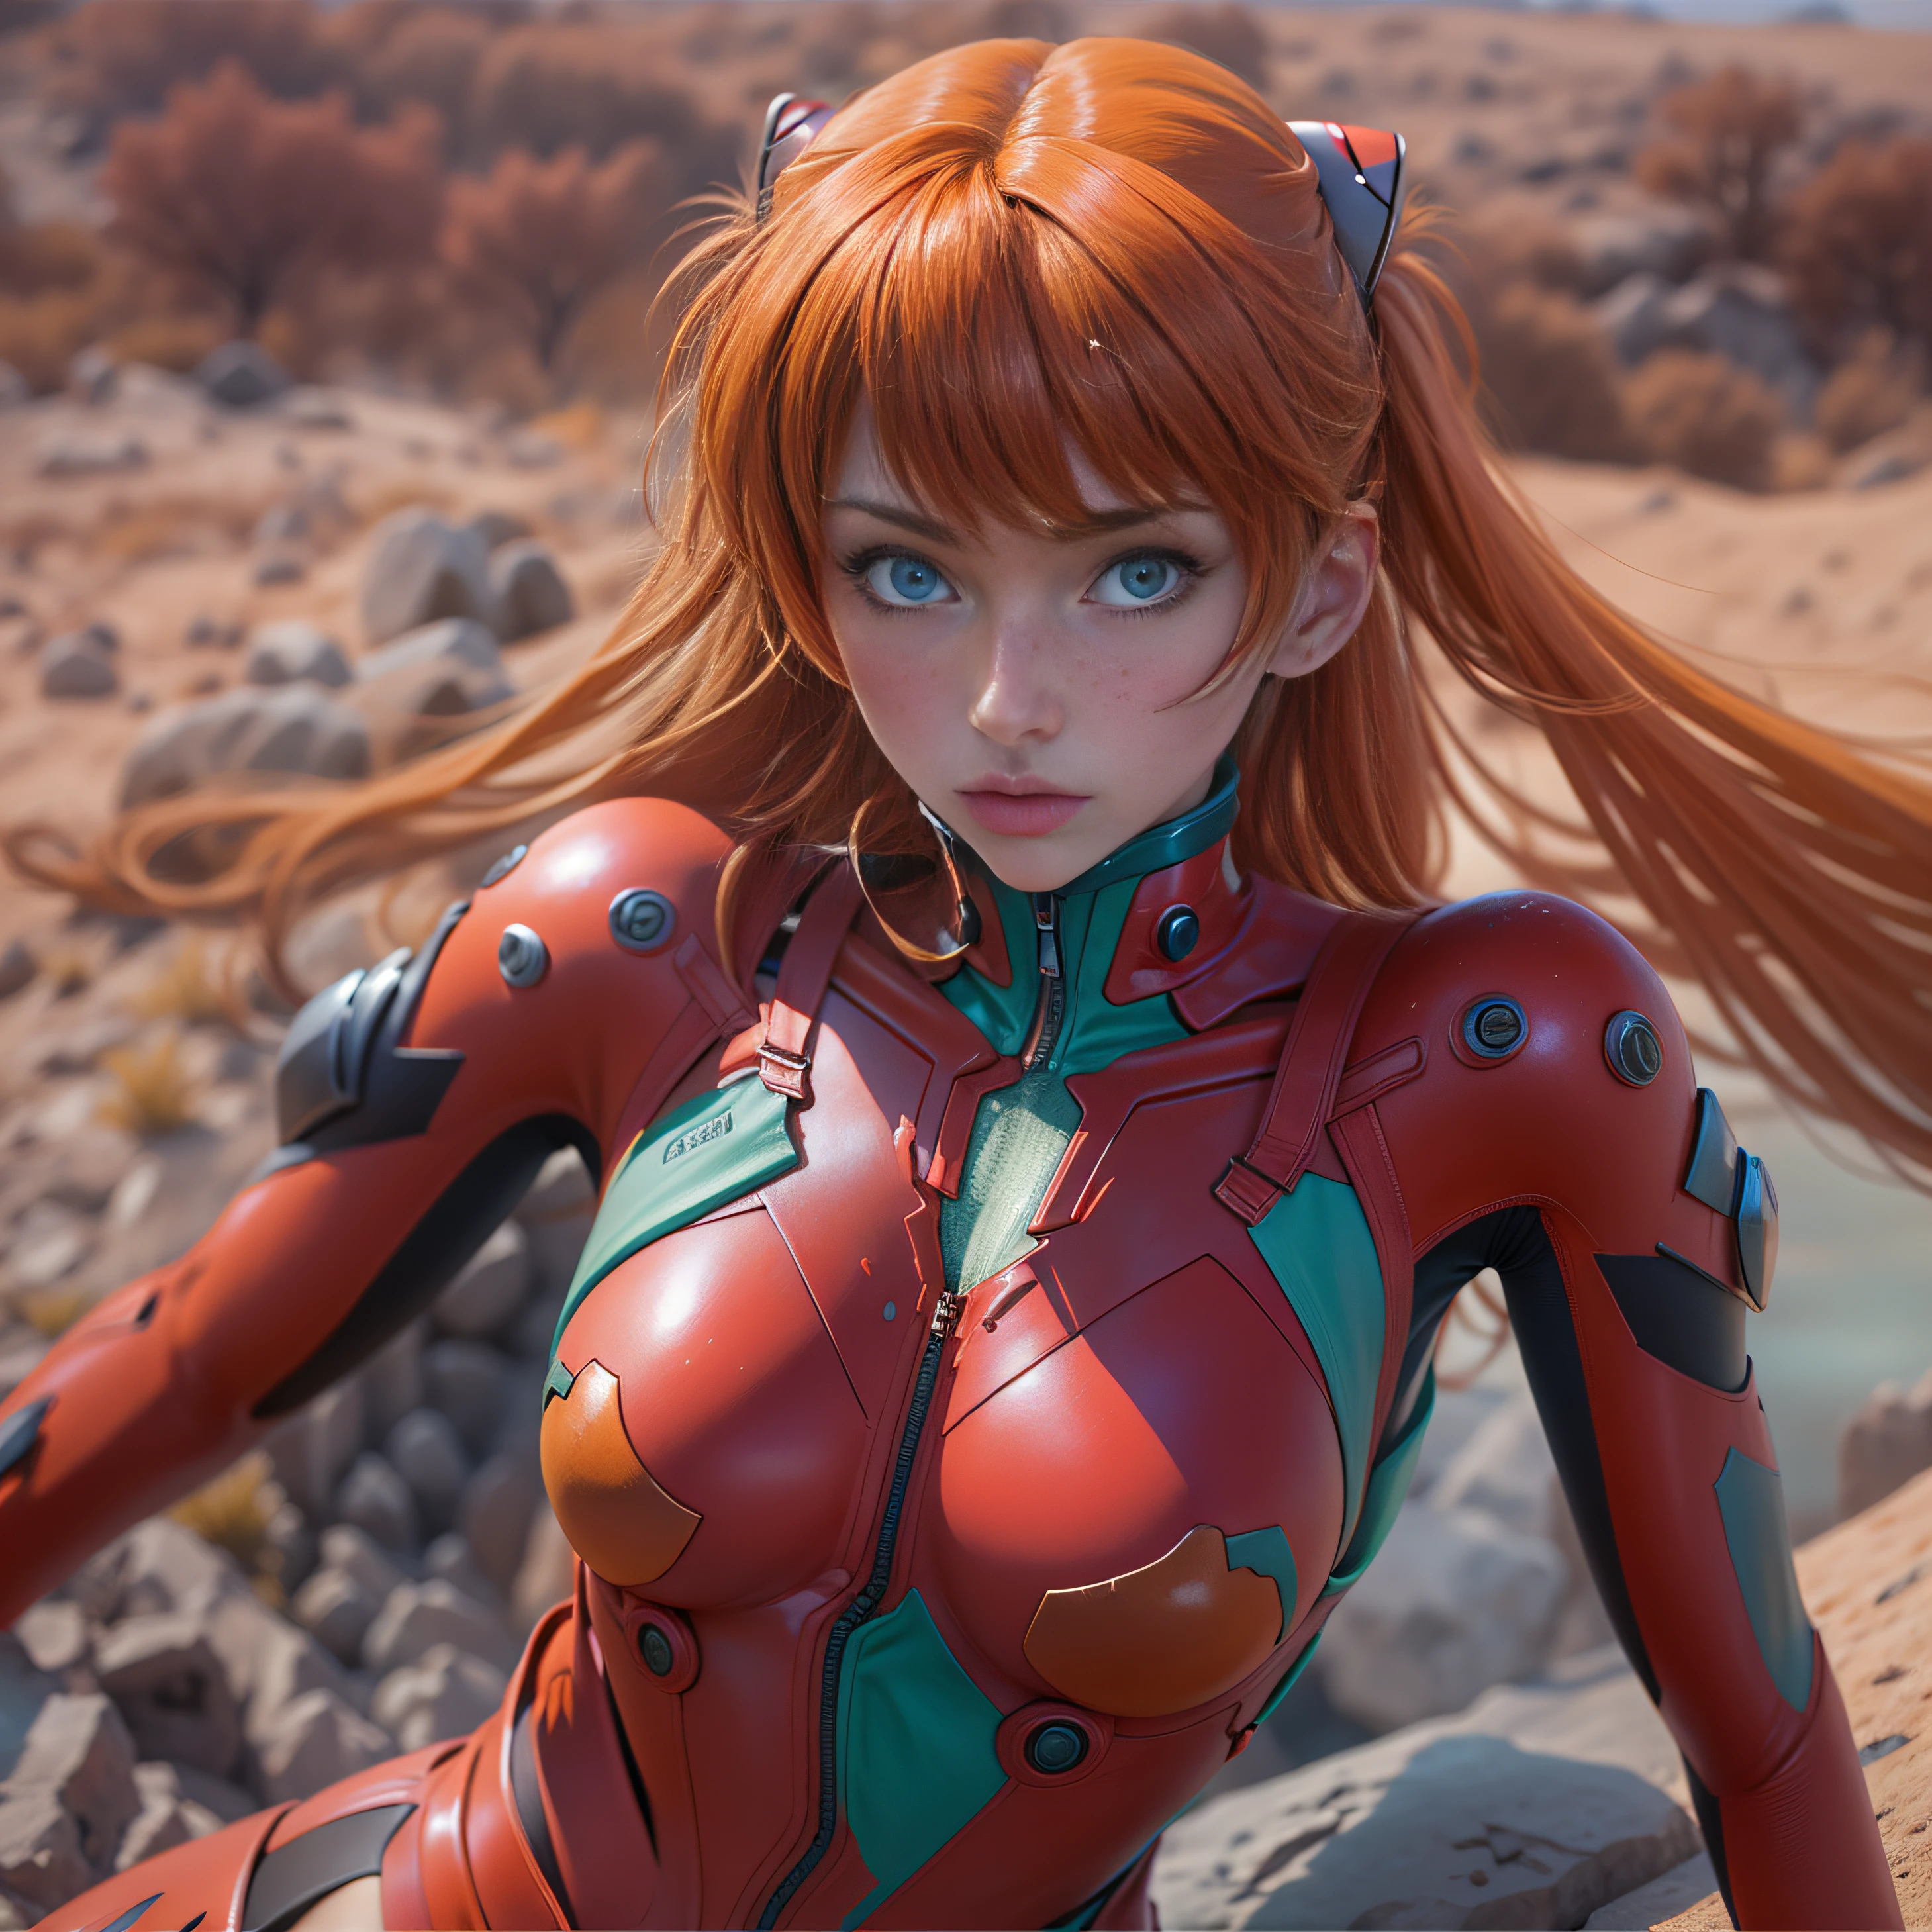 1 girl, Asuka Langley Shikinami, Walking through a red dirt desert, red stones, ((blue eyes)), ((freckles on the face)), in transparent plugsuit, ((perfect)), ((small ass)), (((DeepVnecklineslipdress))), ray tracing, NVIDIA RTX, super resolution, Unreal 5, Sub-Surface Scatterring, PBR Textures, Post processing, Anisotropic filtering, depth of field, maximum sharpness and sharpness, Multilayer textures, Albedo and specular mapping, surface shading, Accurate simulation of light-material interactions, perfect proportions, Octane representation, duotone lighting, Low ISO, white balance, rule of thirds, wide opening, 8K RAW, high-efficiency subpixels, sub-pixel convolution, glow particles